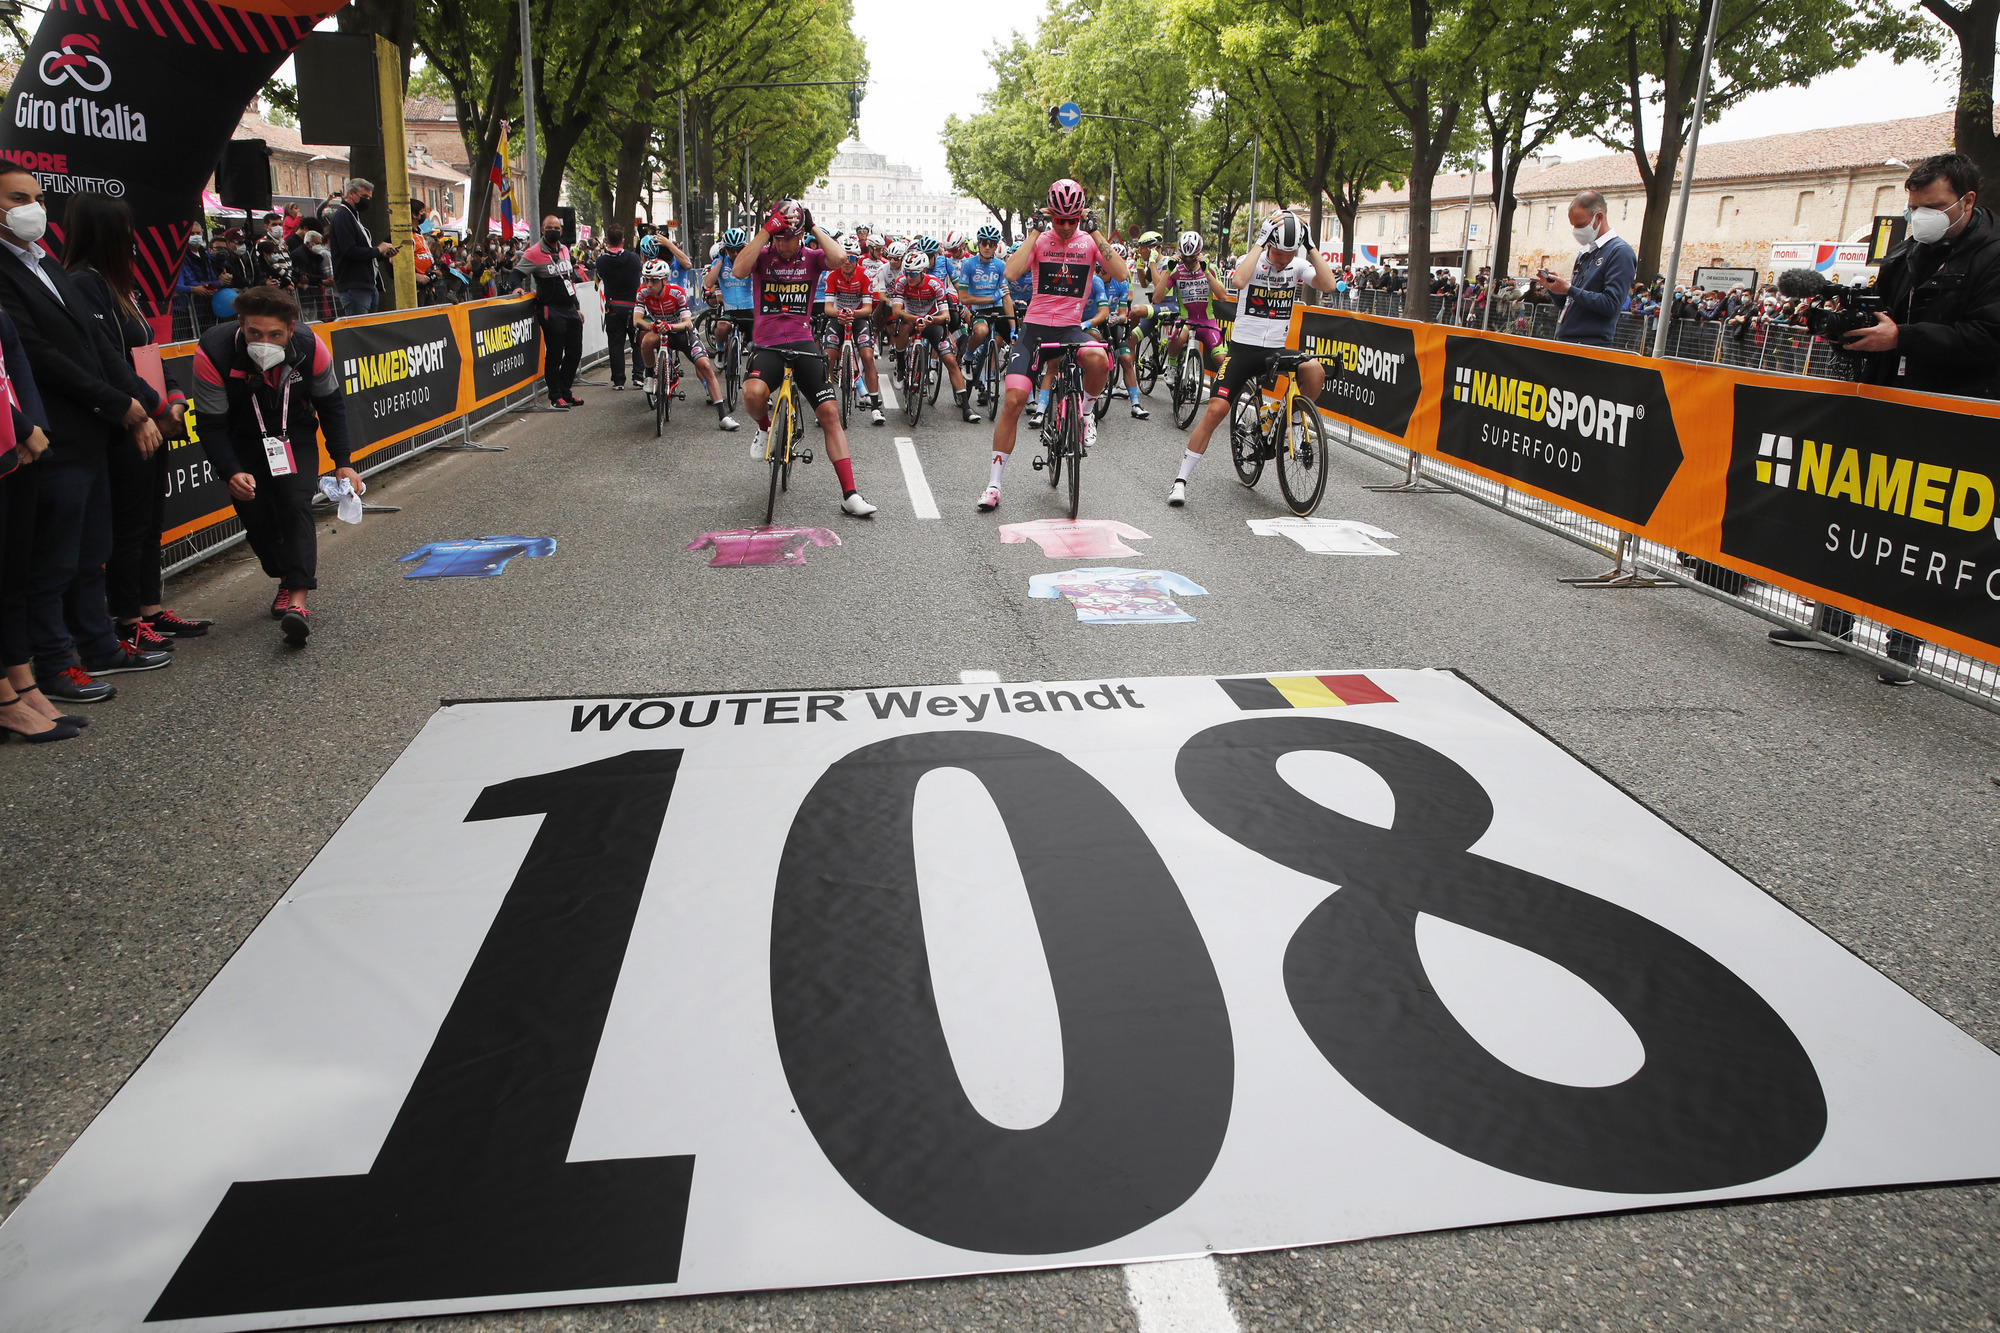 Wouter Weylandt is remembered at the 2021 Giro d'Italia